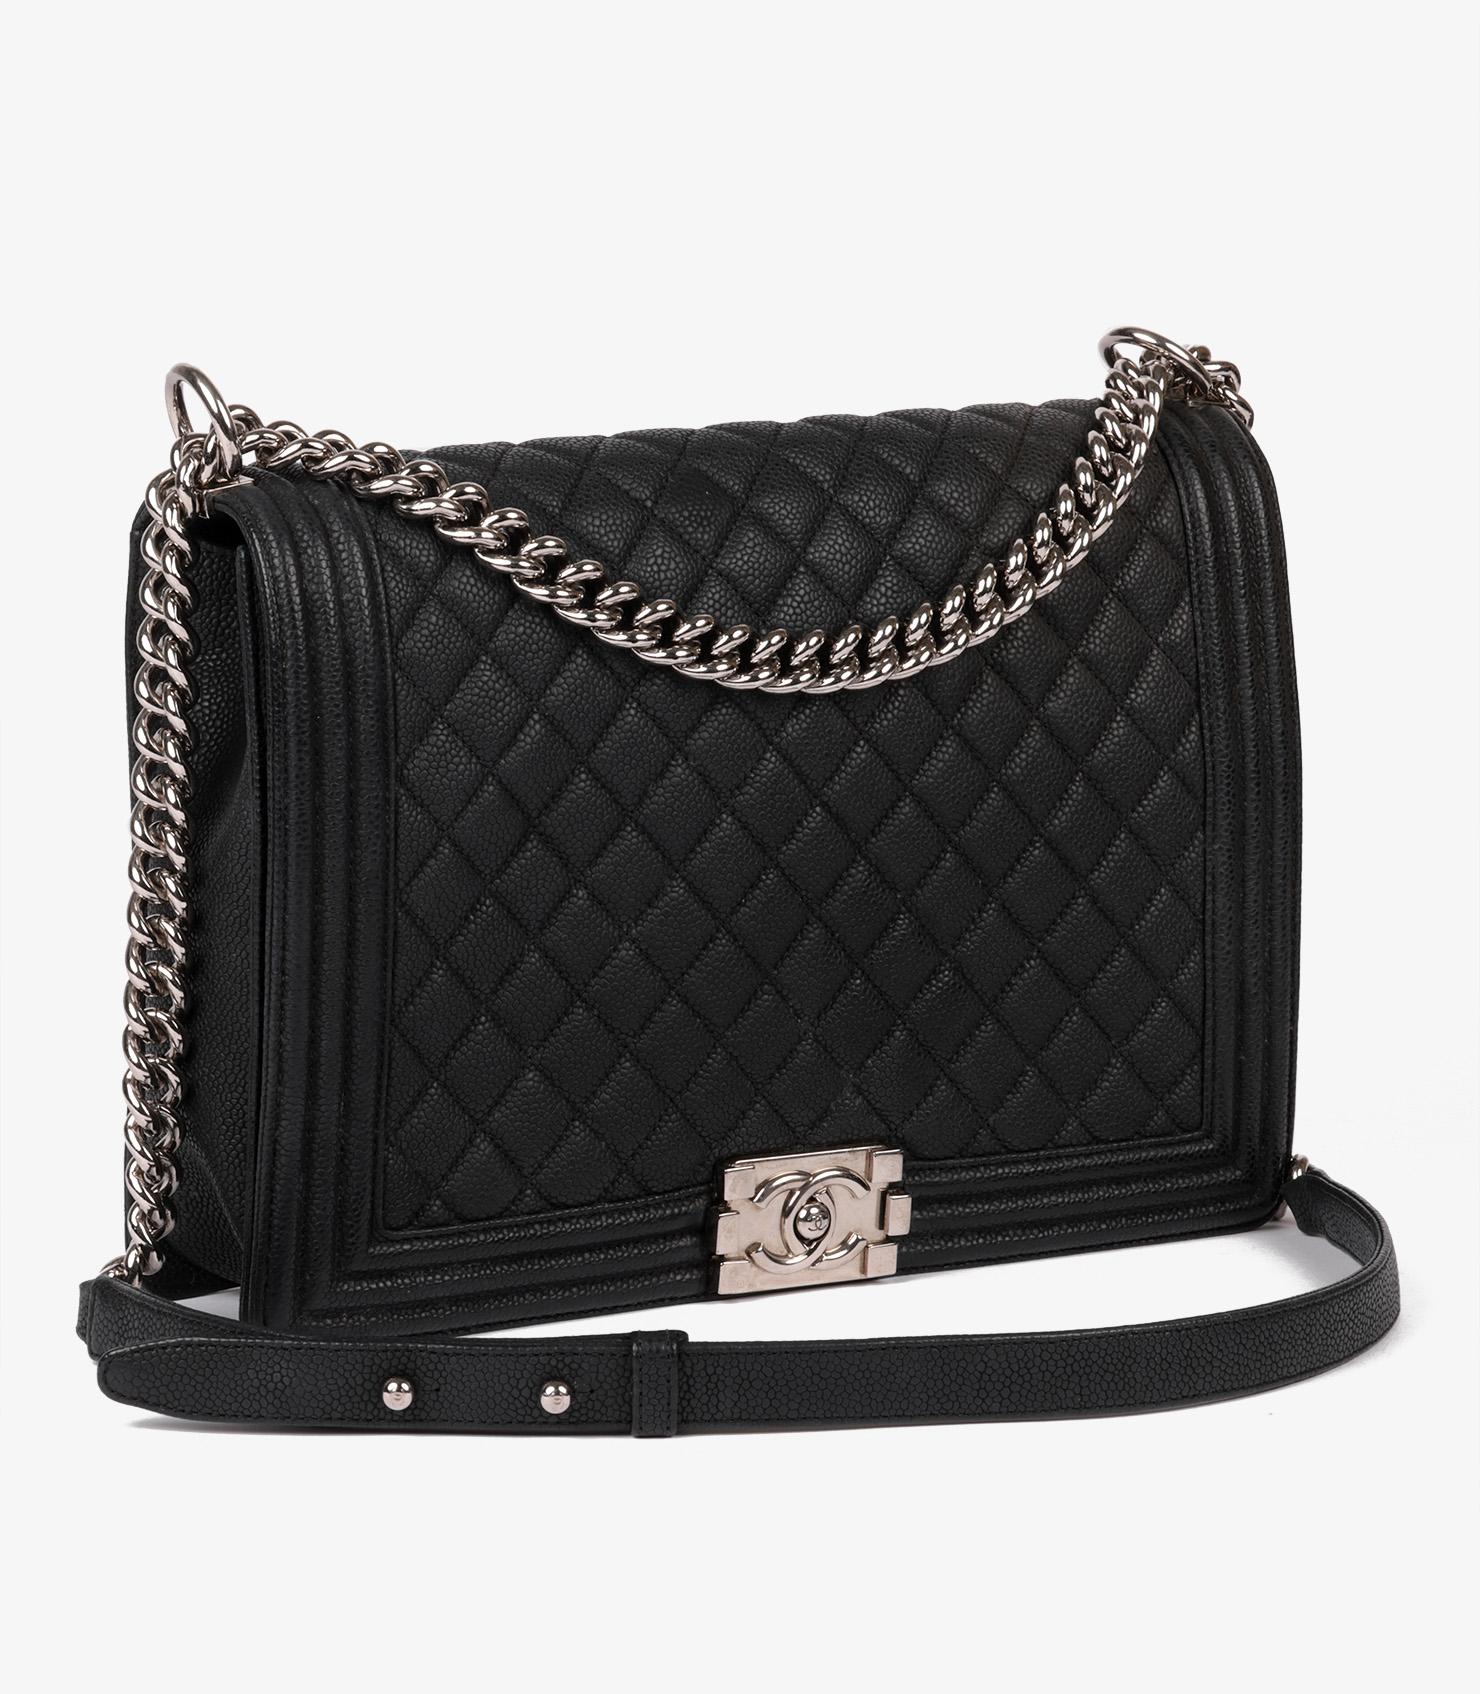 Chanel Black Quilted Caviar Leather Large Le Boy Bag In Excellent Condition For Sale In Bishop's Stortford, Hertfordshire